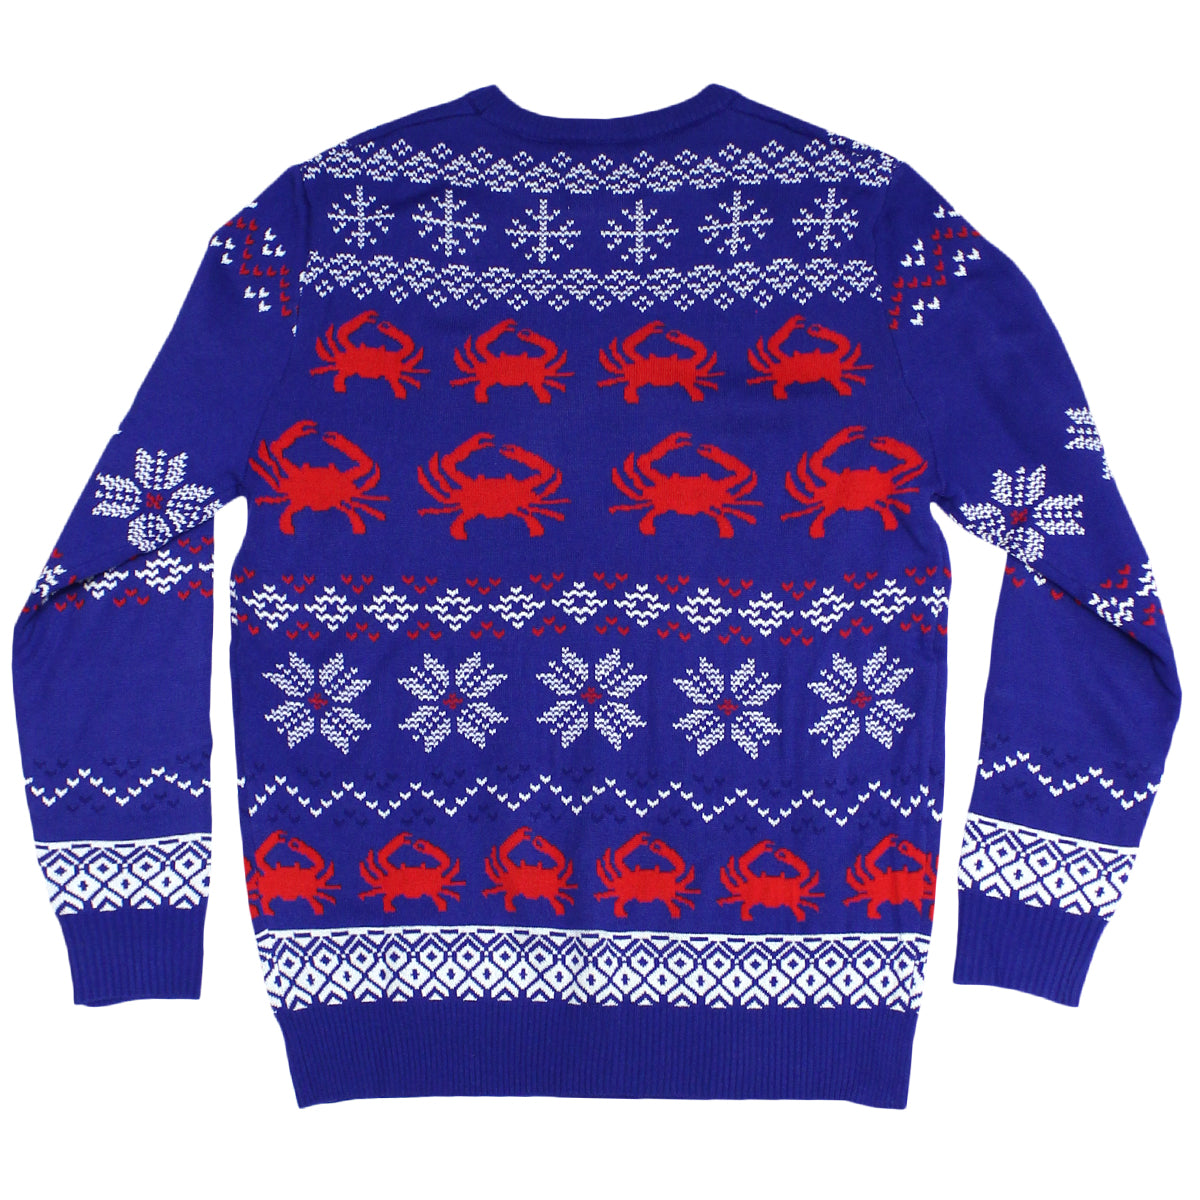 Seasoning's Greetings (Blue) / Knit Sweater - Route One Apparel